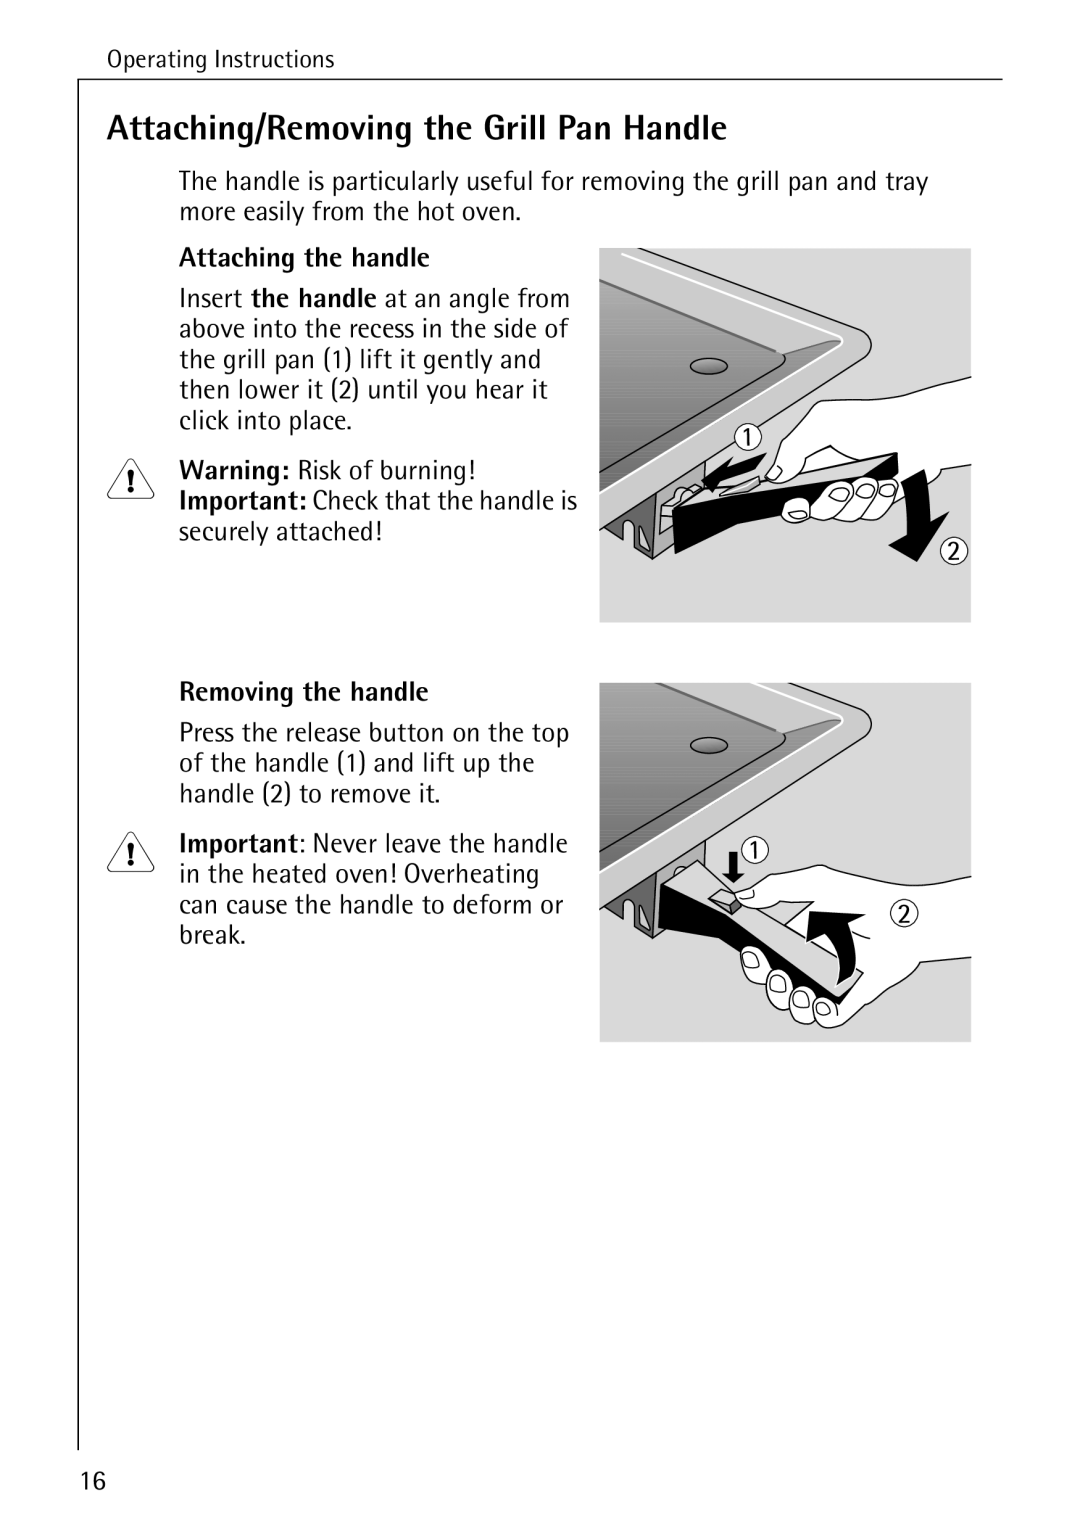 Electrolux B2190-1 manual Attaching/Removing the Grill Pan Handle, Attaching the handle, Removing the handle 